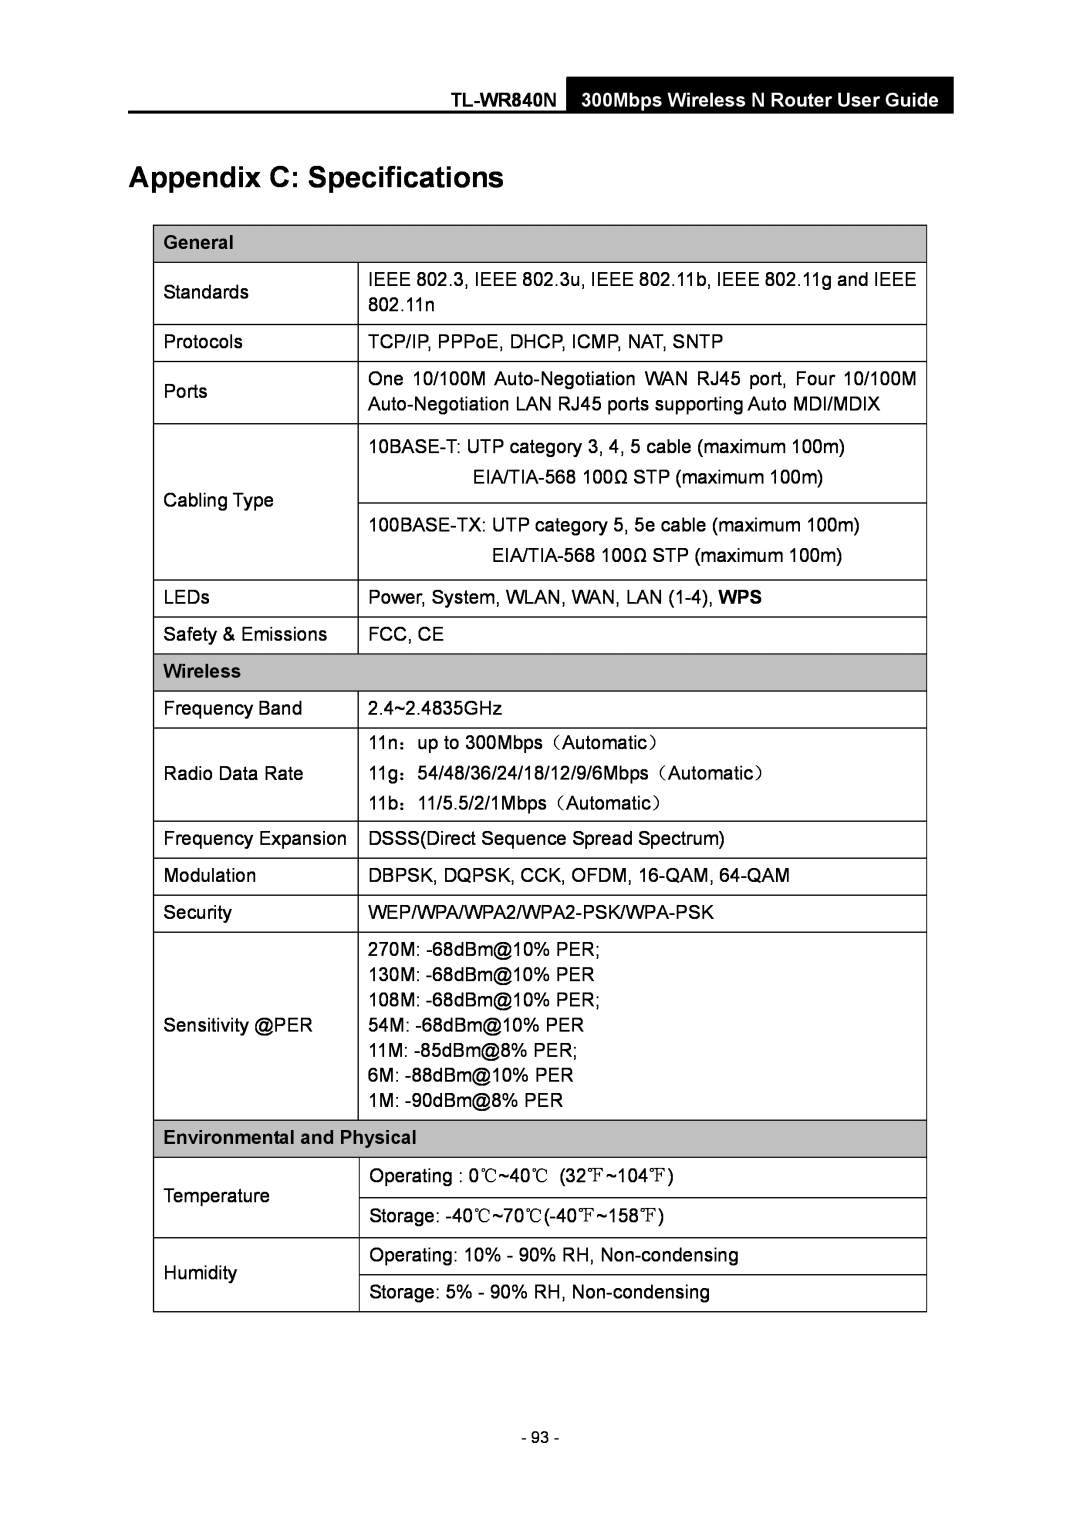 TP-Link TL-WR840N manual Appendix C Specifications, General, Wireless, Environmental and Physical 